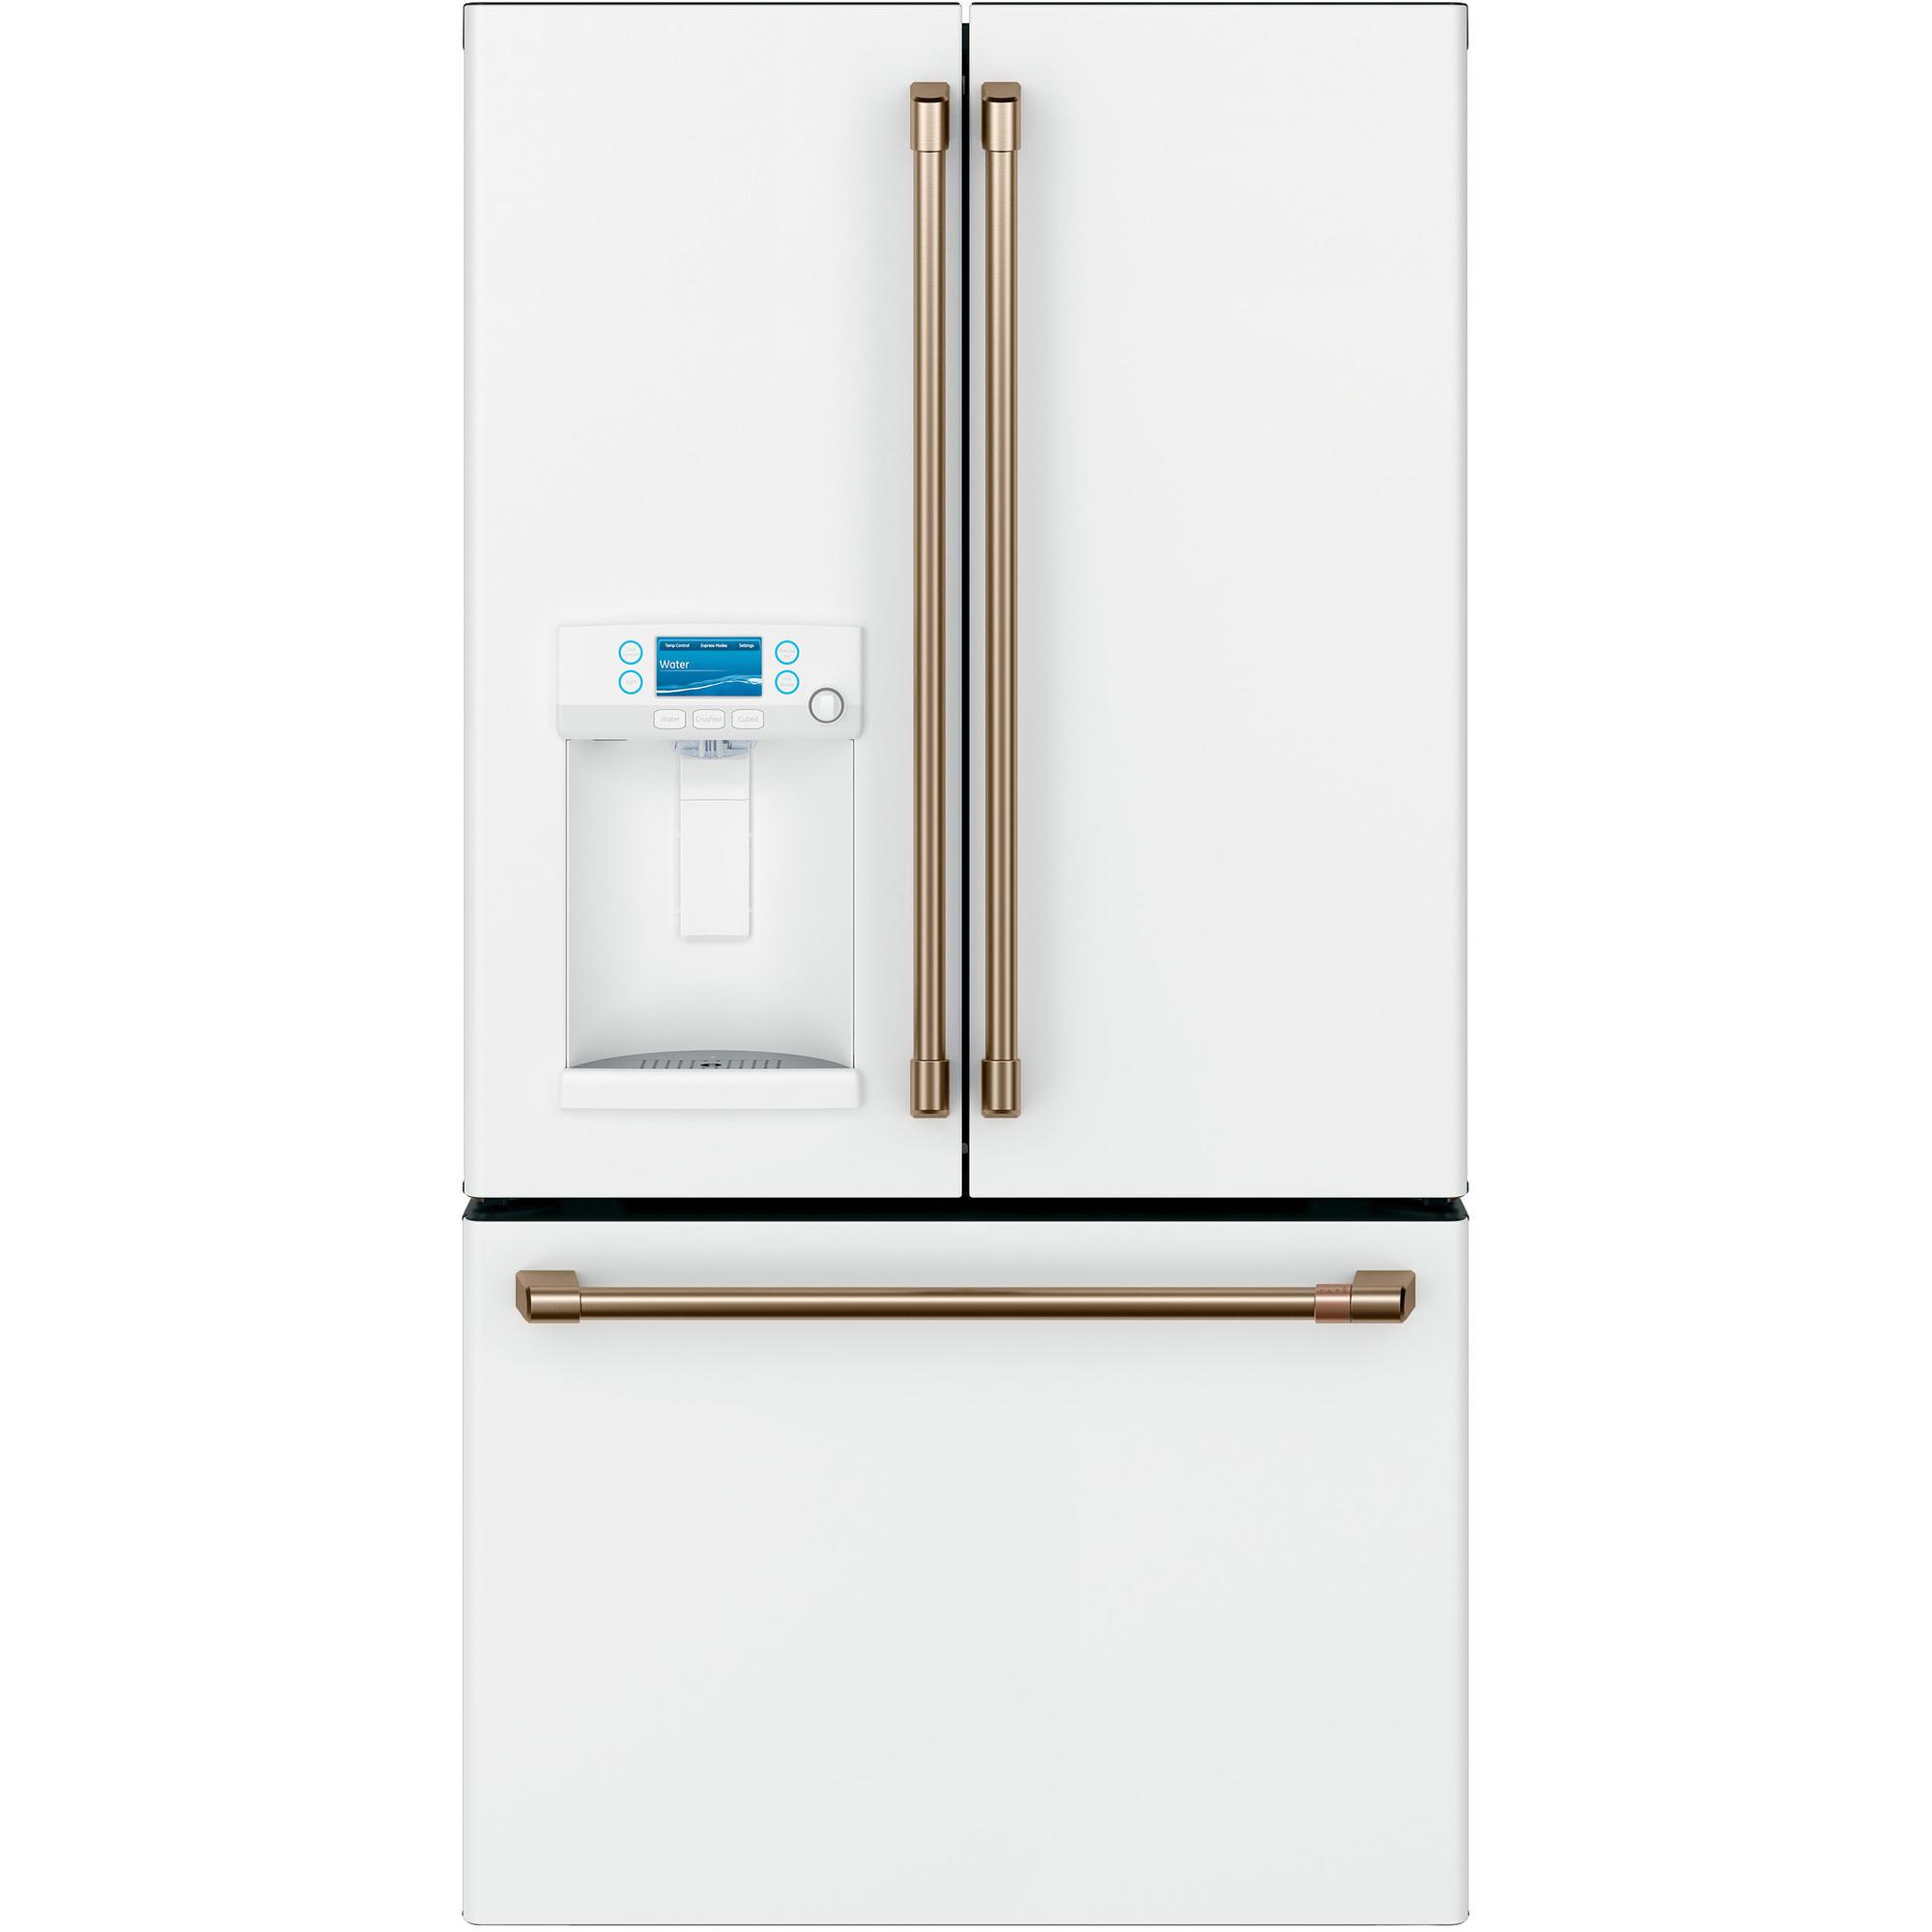 Cafe Café CYE22TP4MW2 22.2 cu. ft. Counter-Depth French Door Refrigerator in Matte White